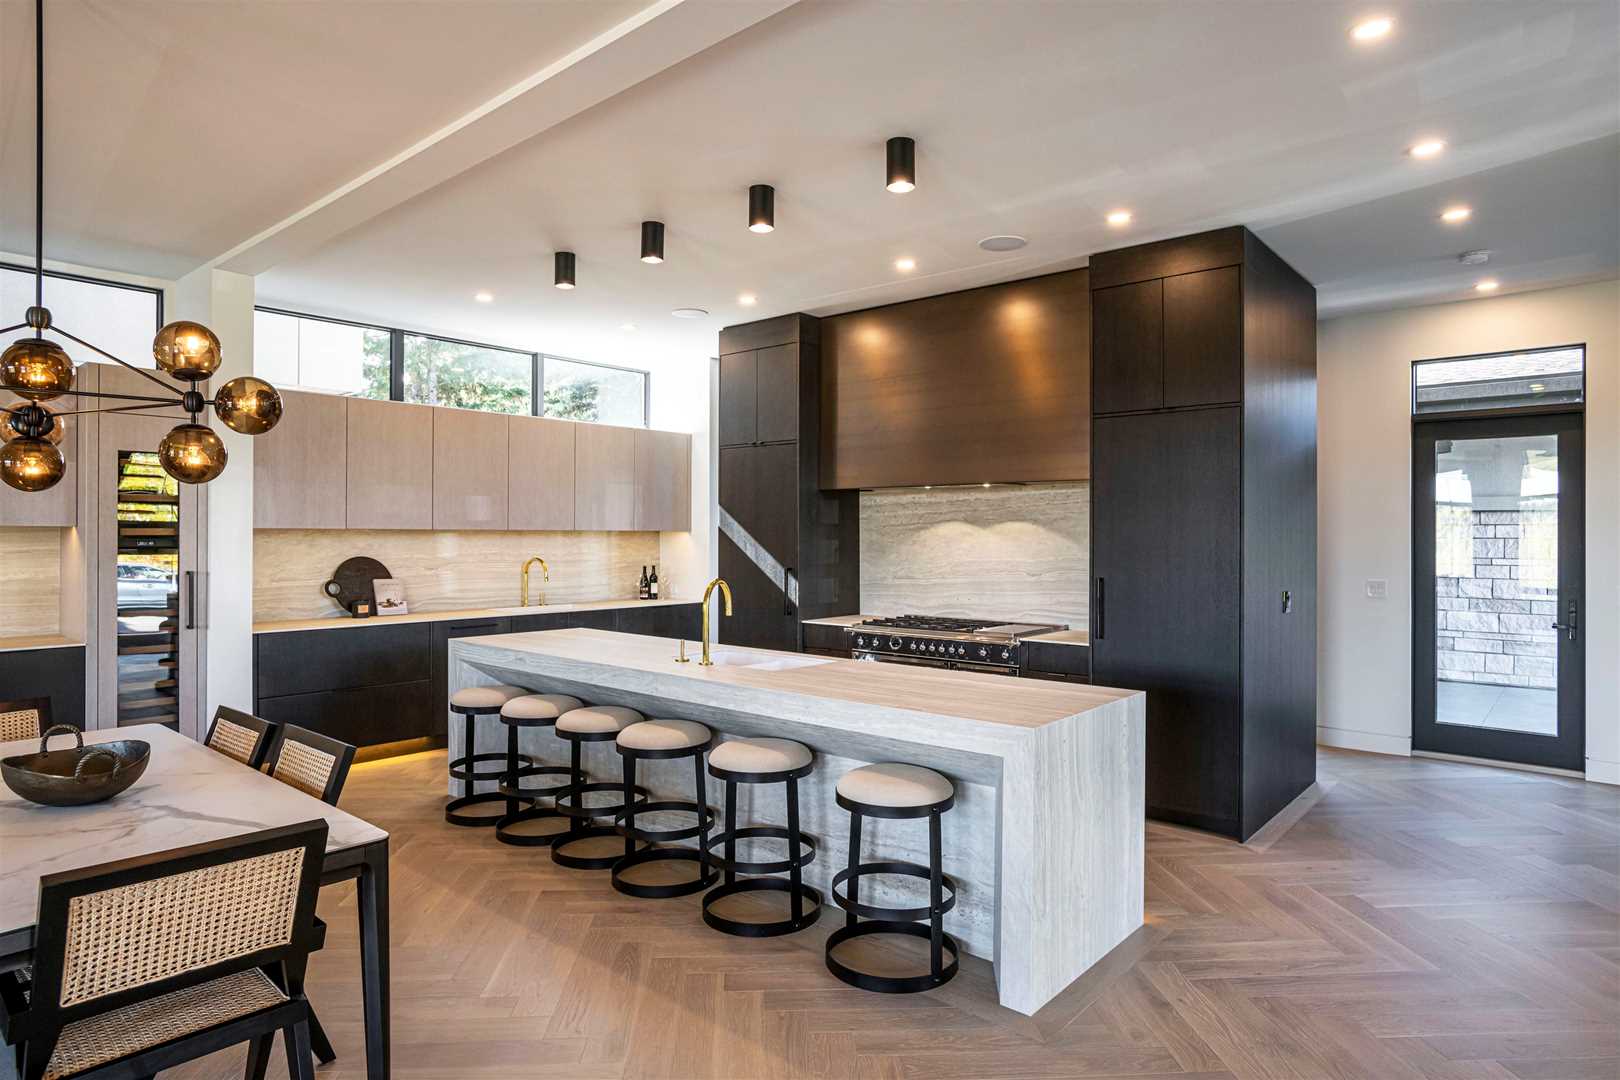 Kitchen with light hardwood floor, white ceiling; white marble waterfall island with six chairs facing black bordered stove area